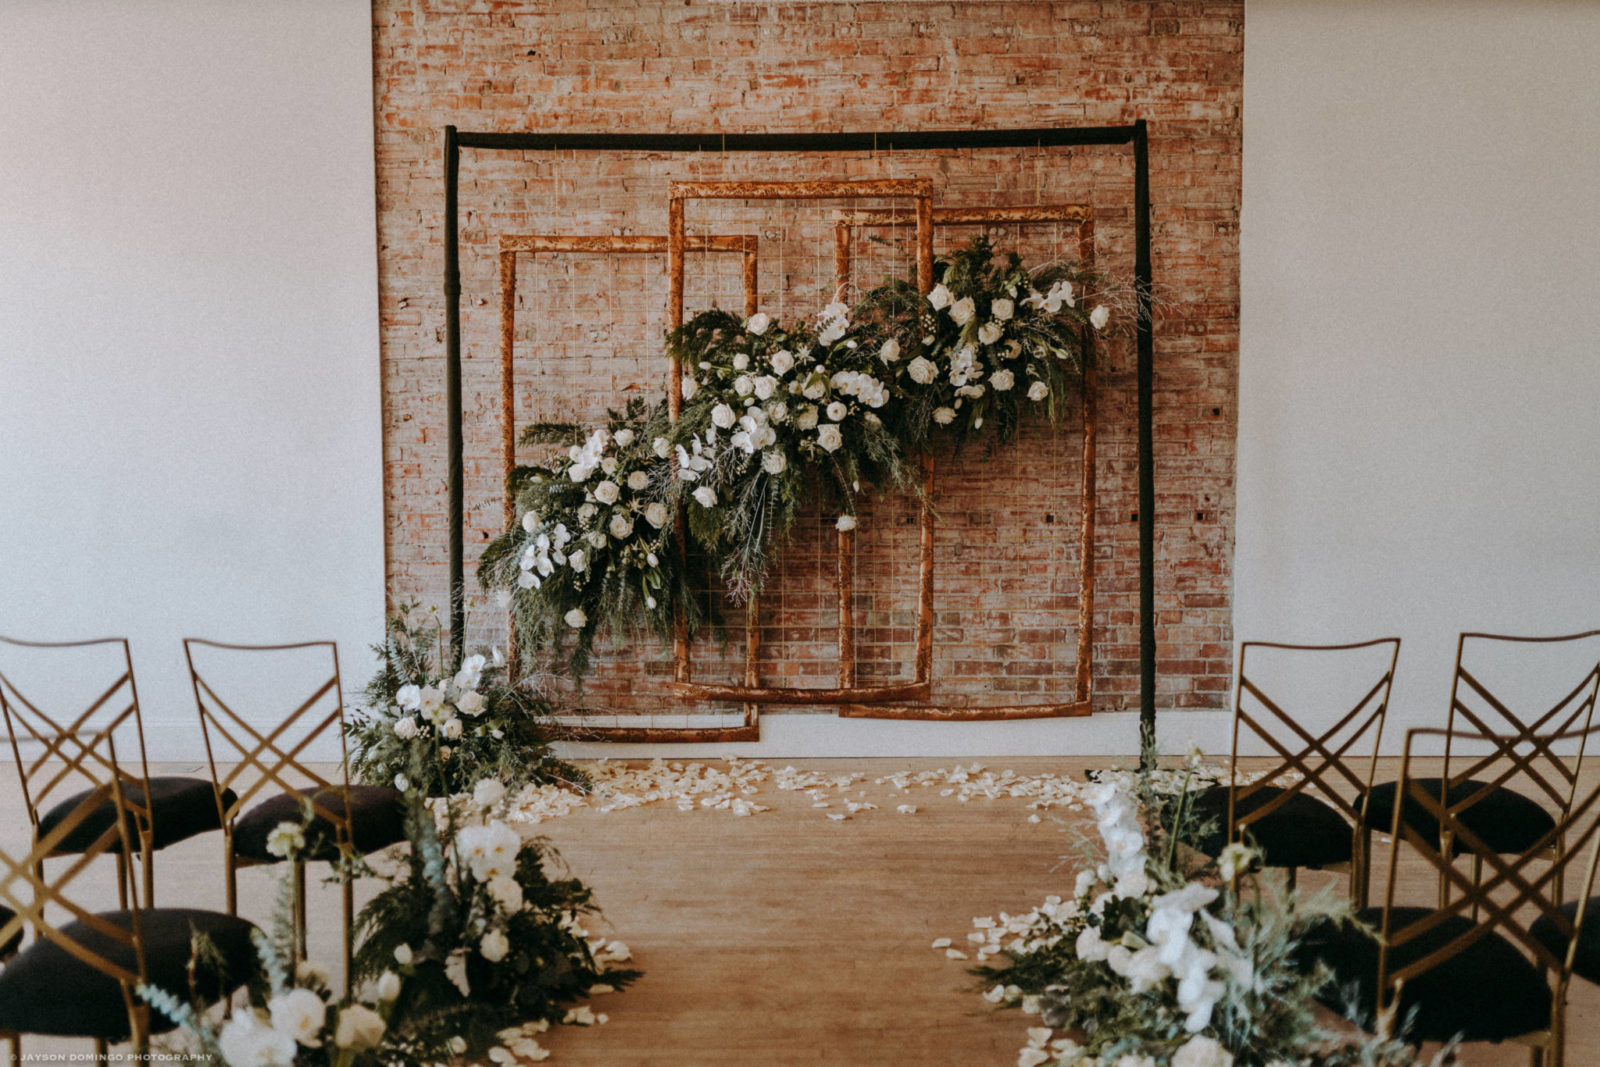 Industrial wedding ceremony design inspiration with hanging panels and greenery in Calgary Alberta 